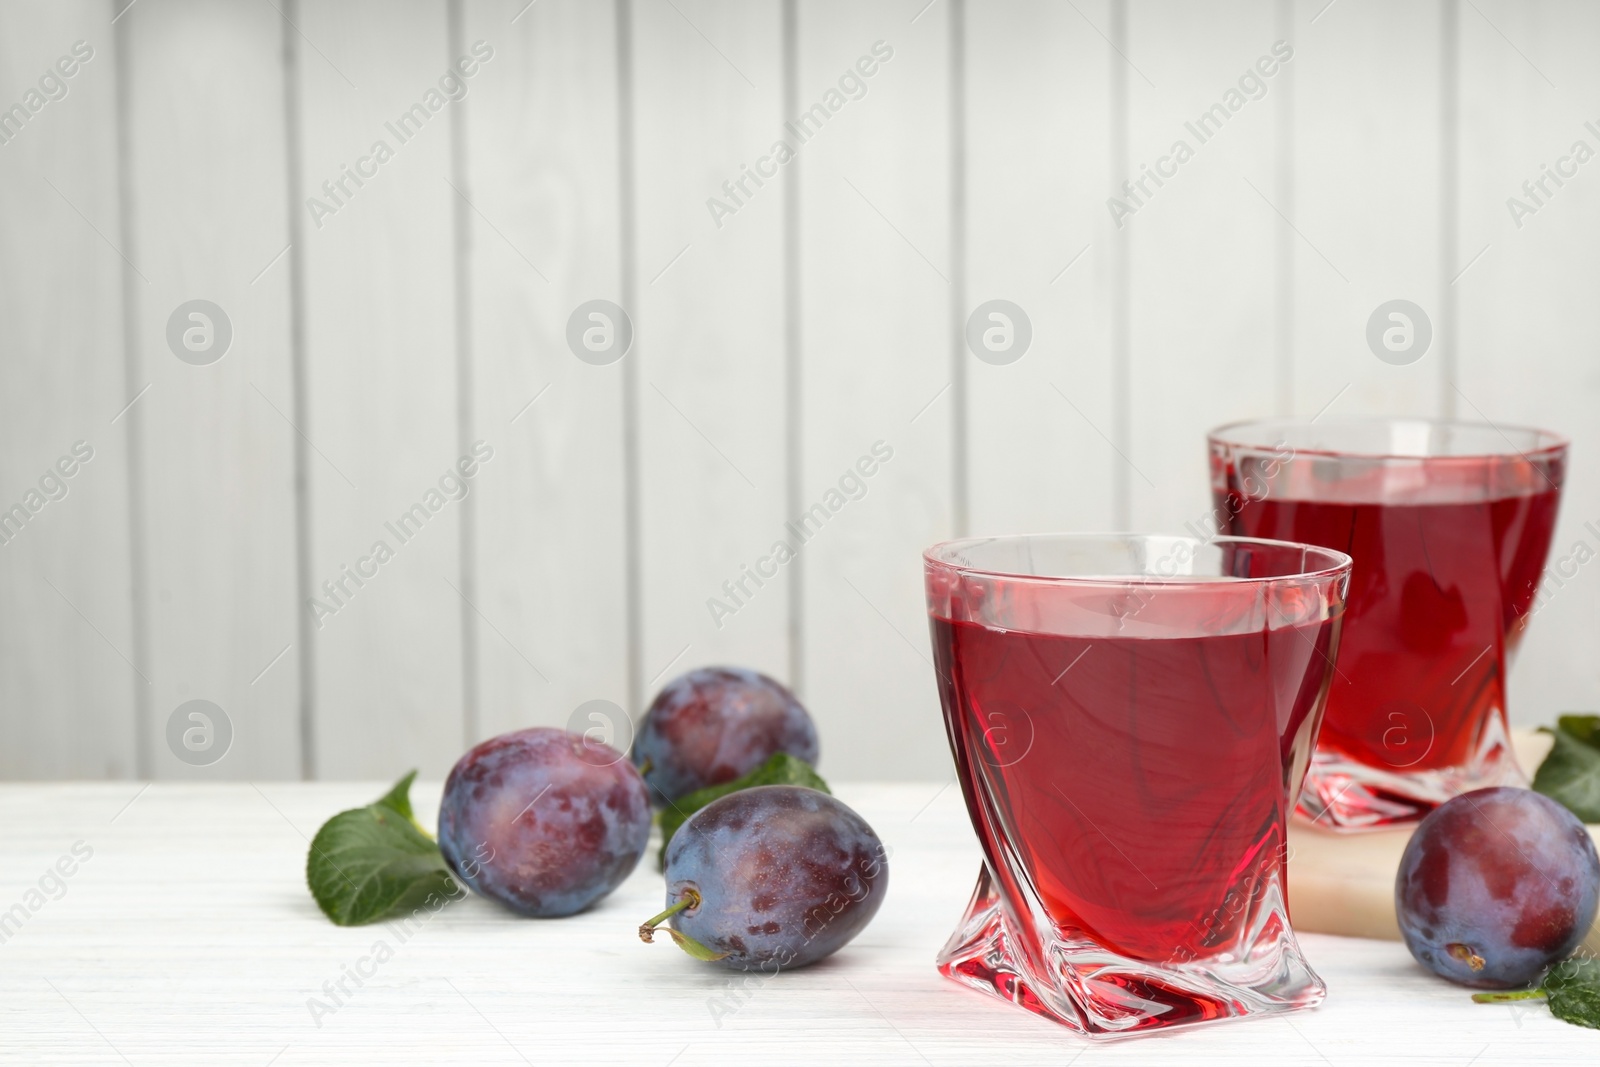 Photo of Delicious plum liquor and ripe fruits on table against white background, space for text. Homemade strong alcoholic beverage